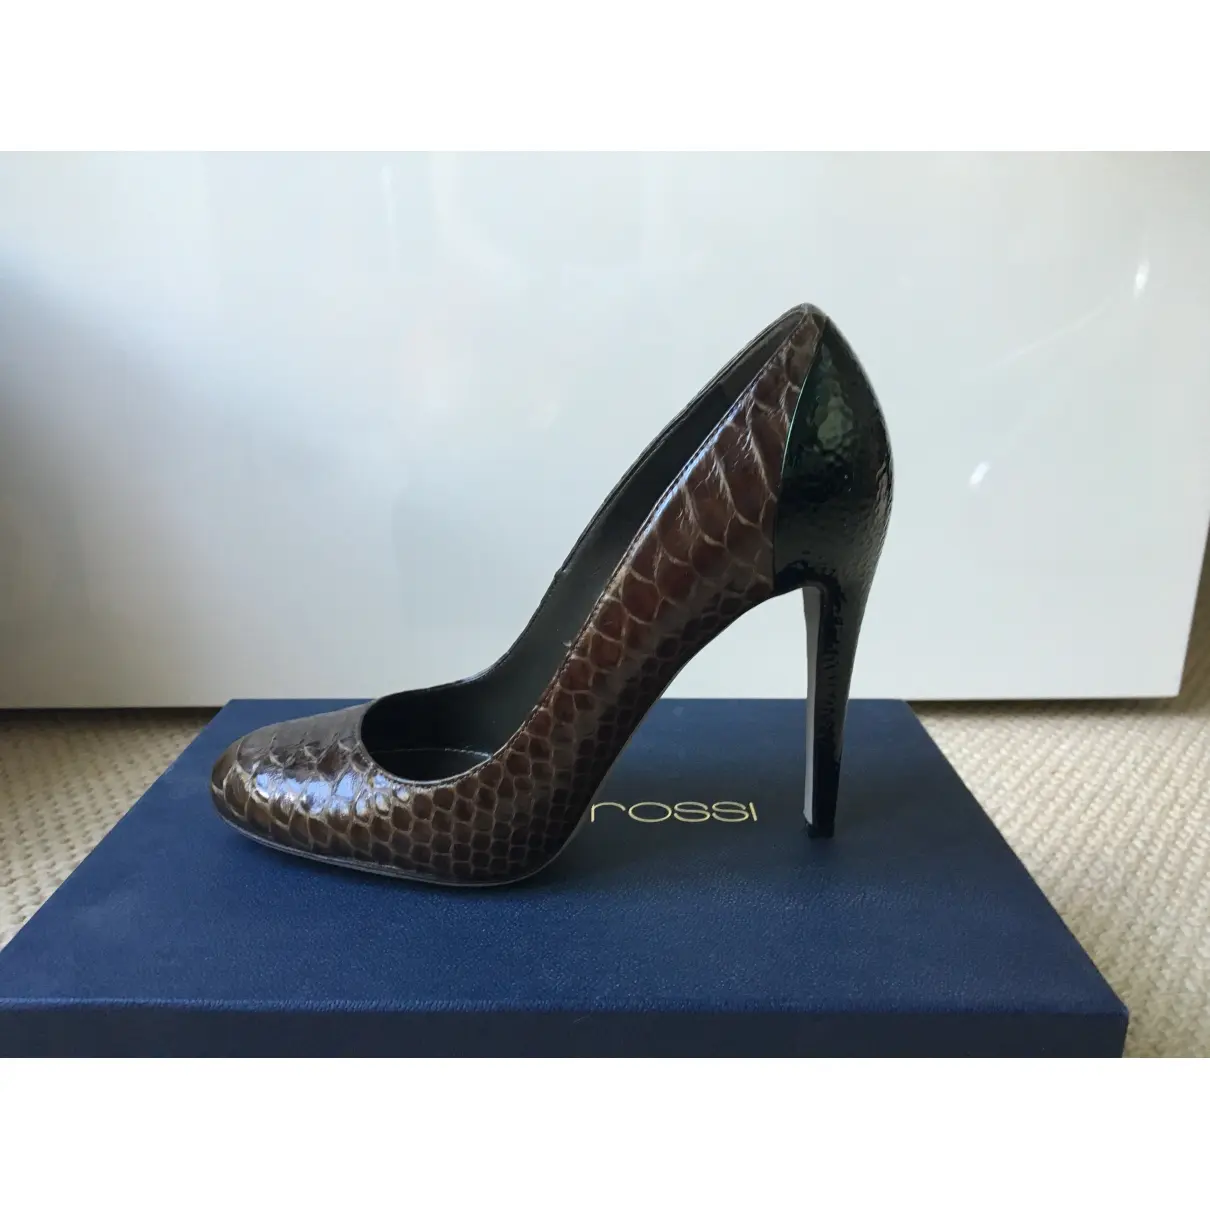 Sergio Rossi SNAKESKIN PUMPS for sale